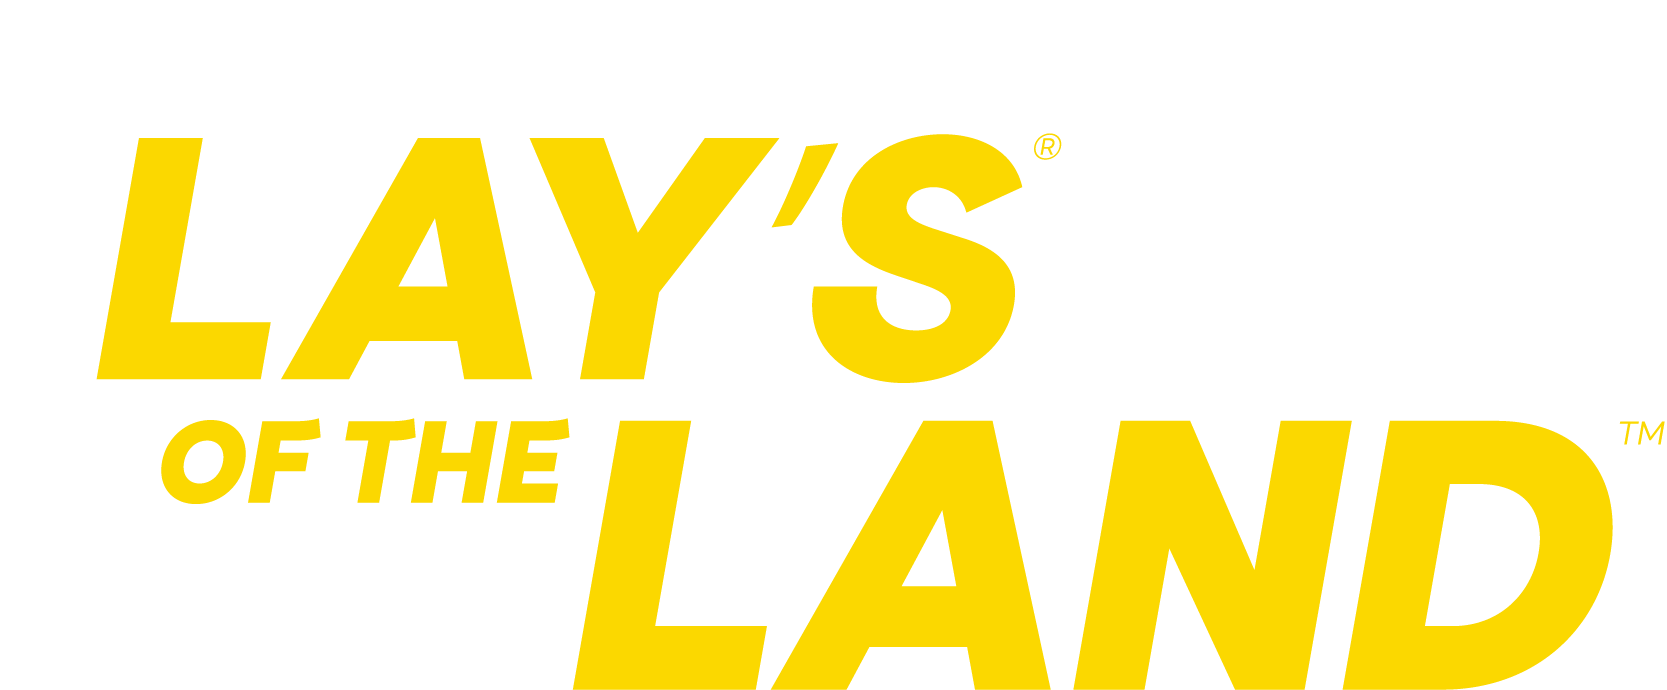 Explore the Lay's of the Land